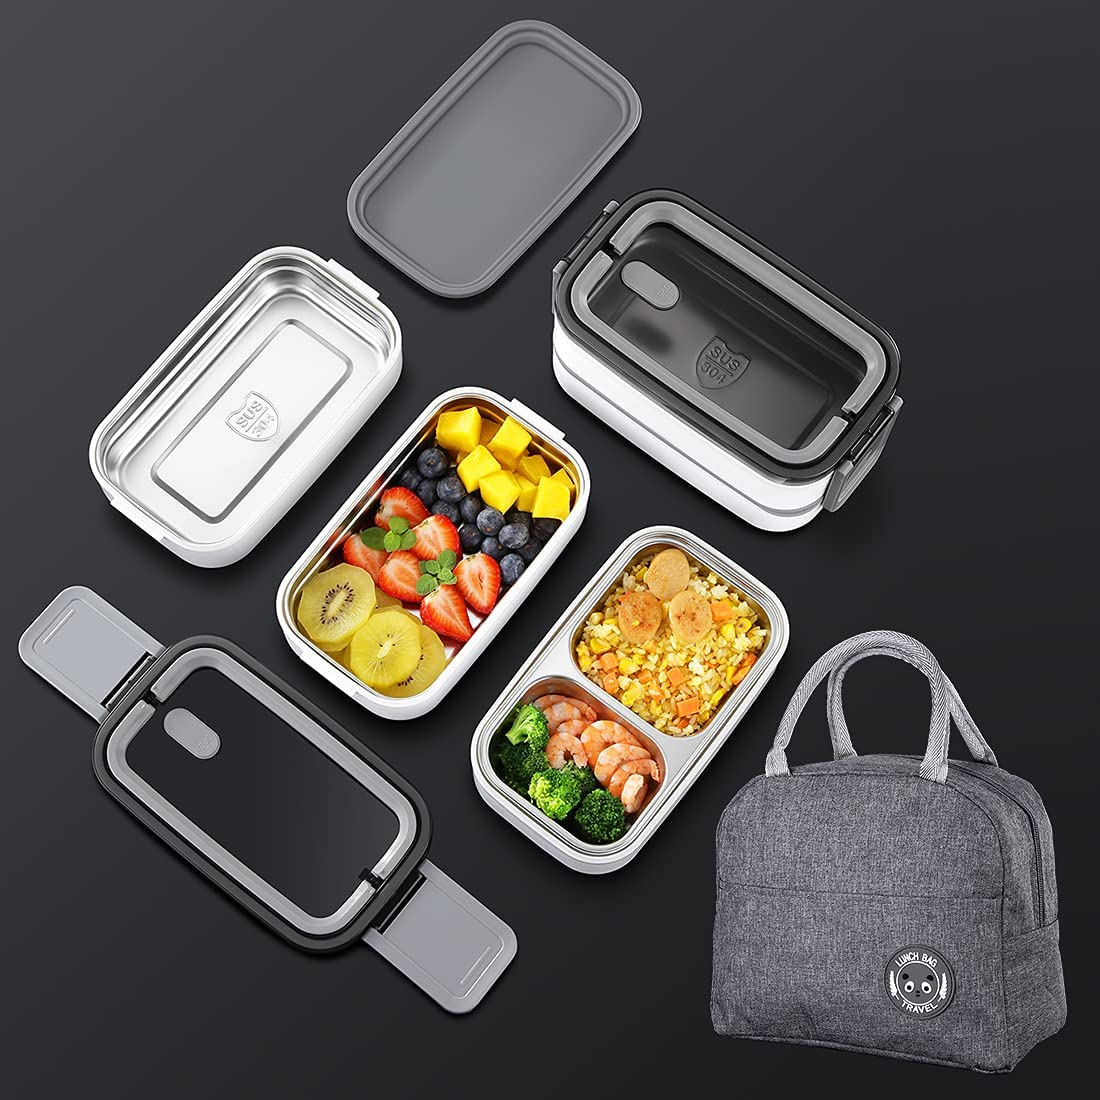 https://www.honestbrandreviews.com/wp-content/uploads/2022/05/20-Best-Insulated-Lunch-Boxes-for-Hot-food-1.jpg